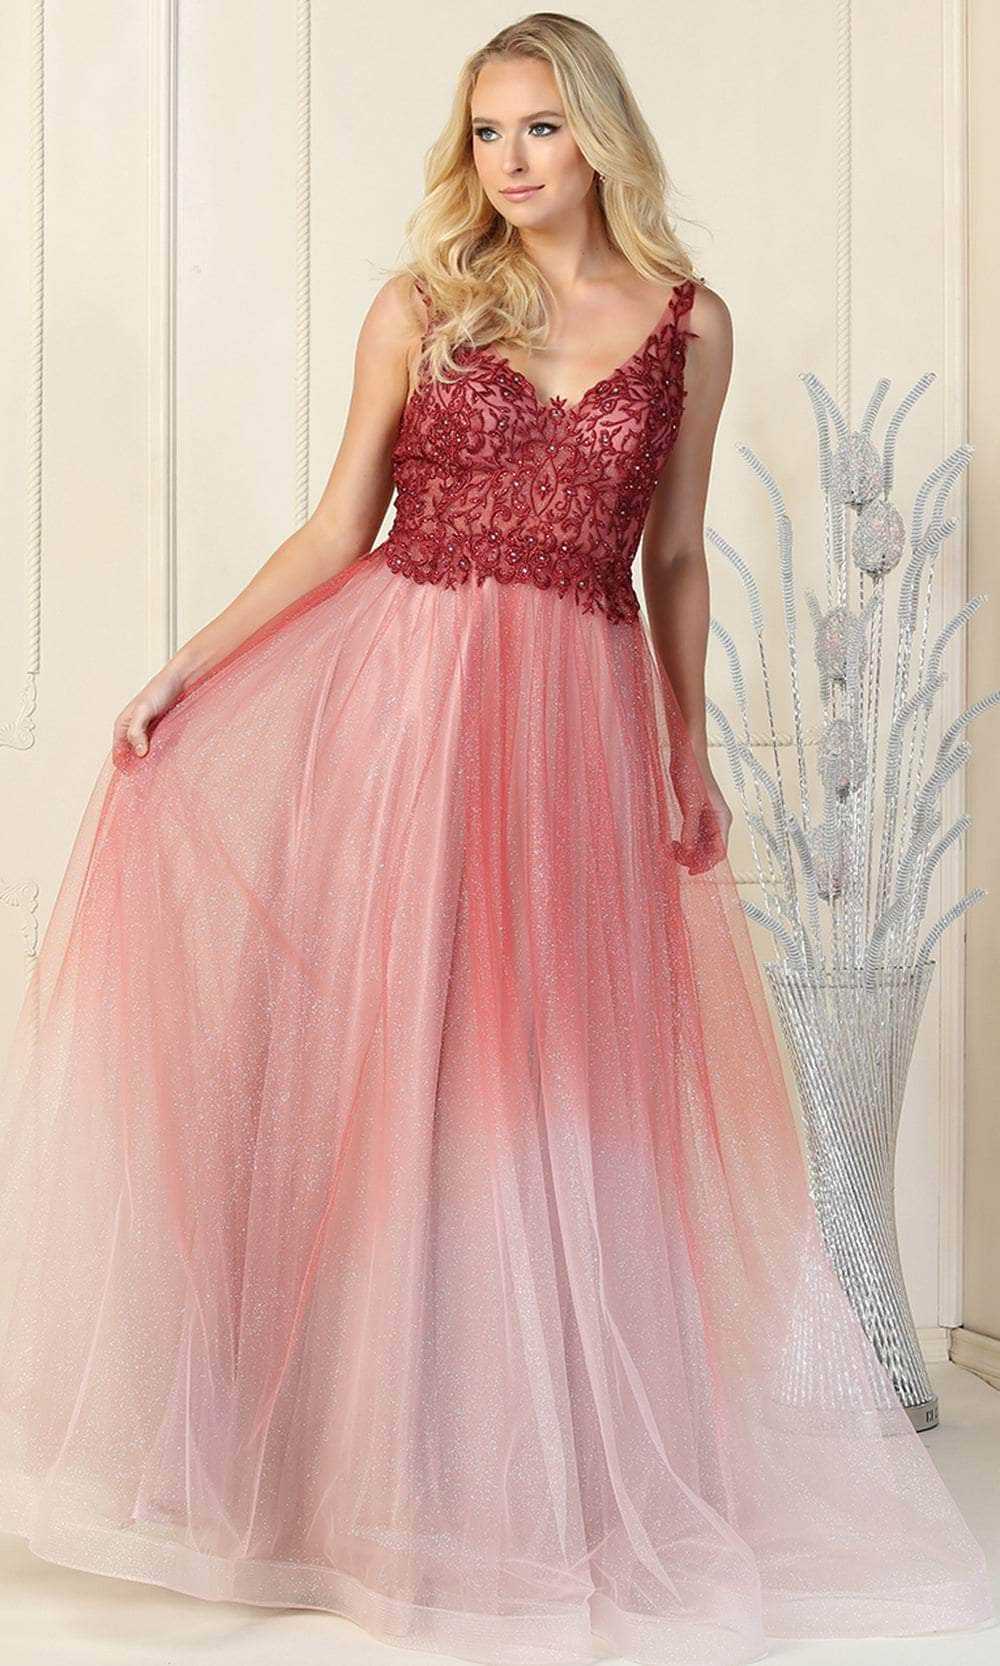 May Queen, May Queen RQ7899 - Sleeveless V-neck Formal Gown